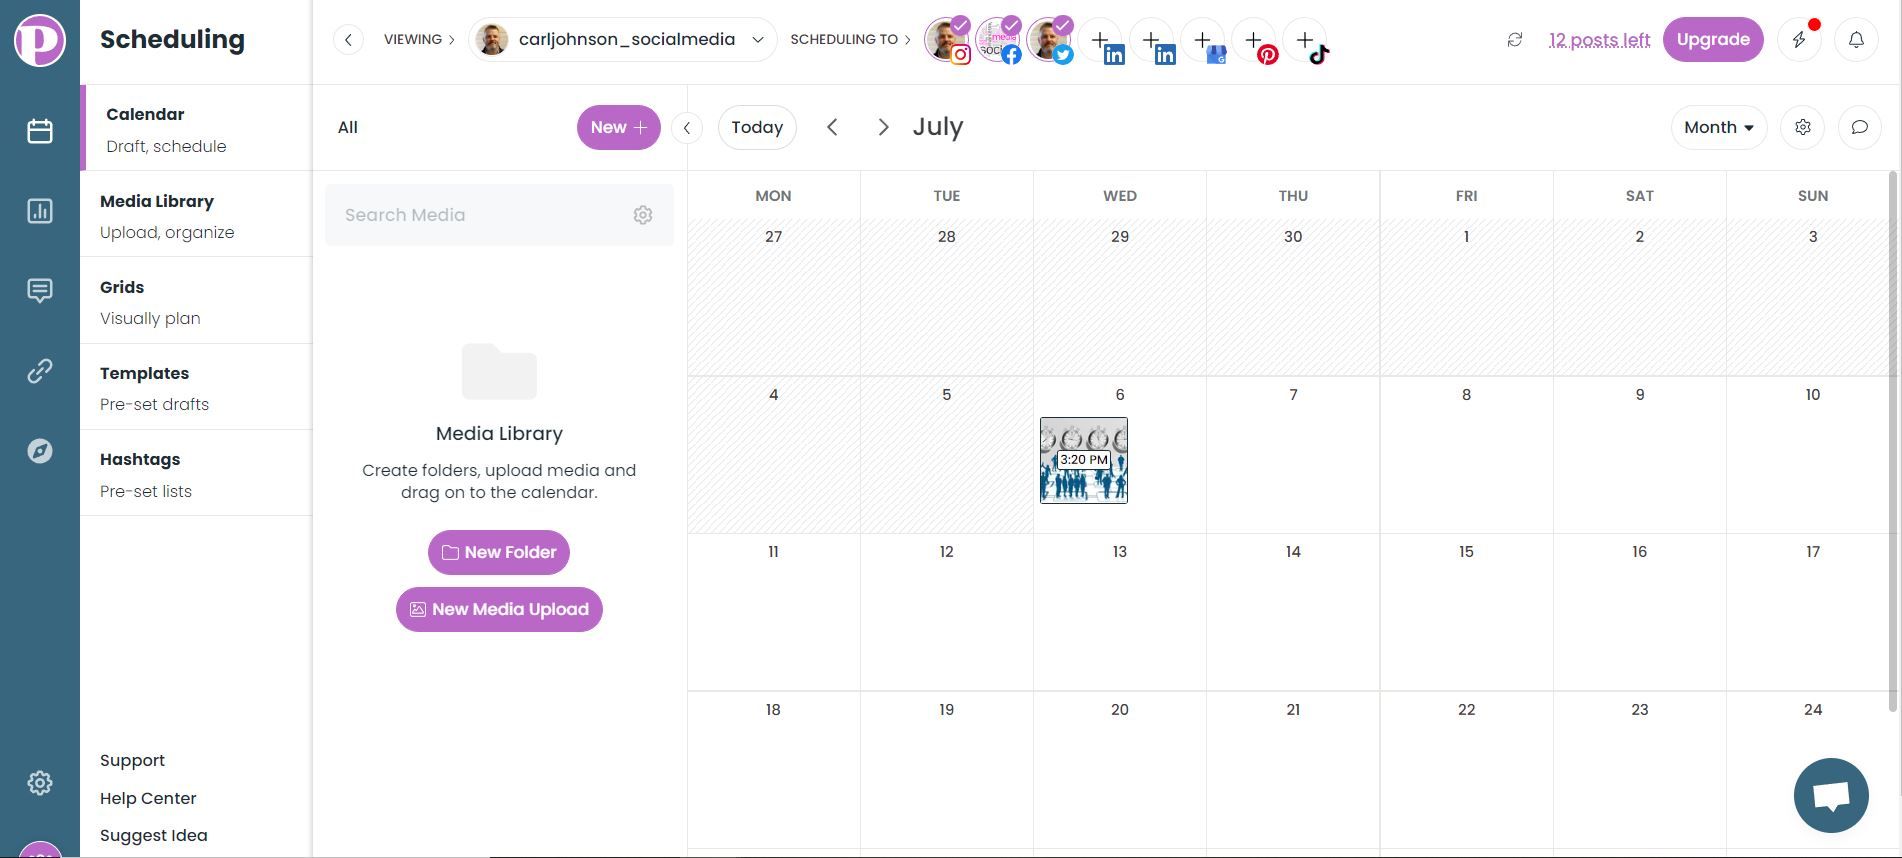 Grid calendar type of Pallyy scheduling tool makes Instagram management easy